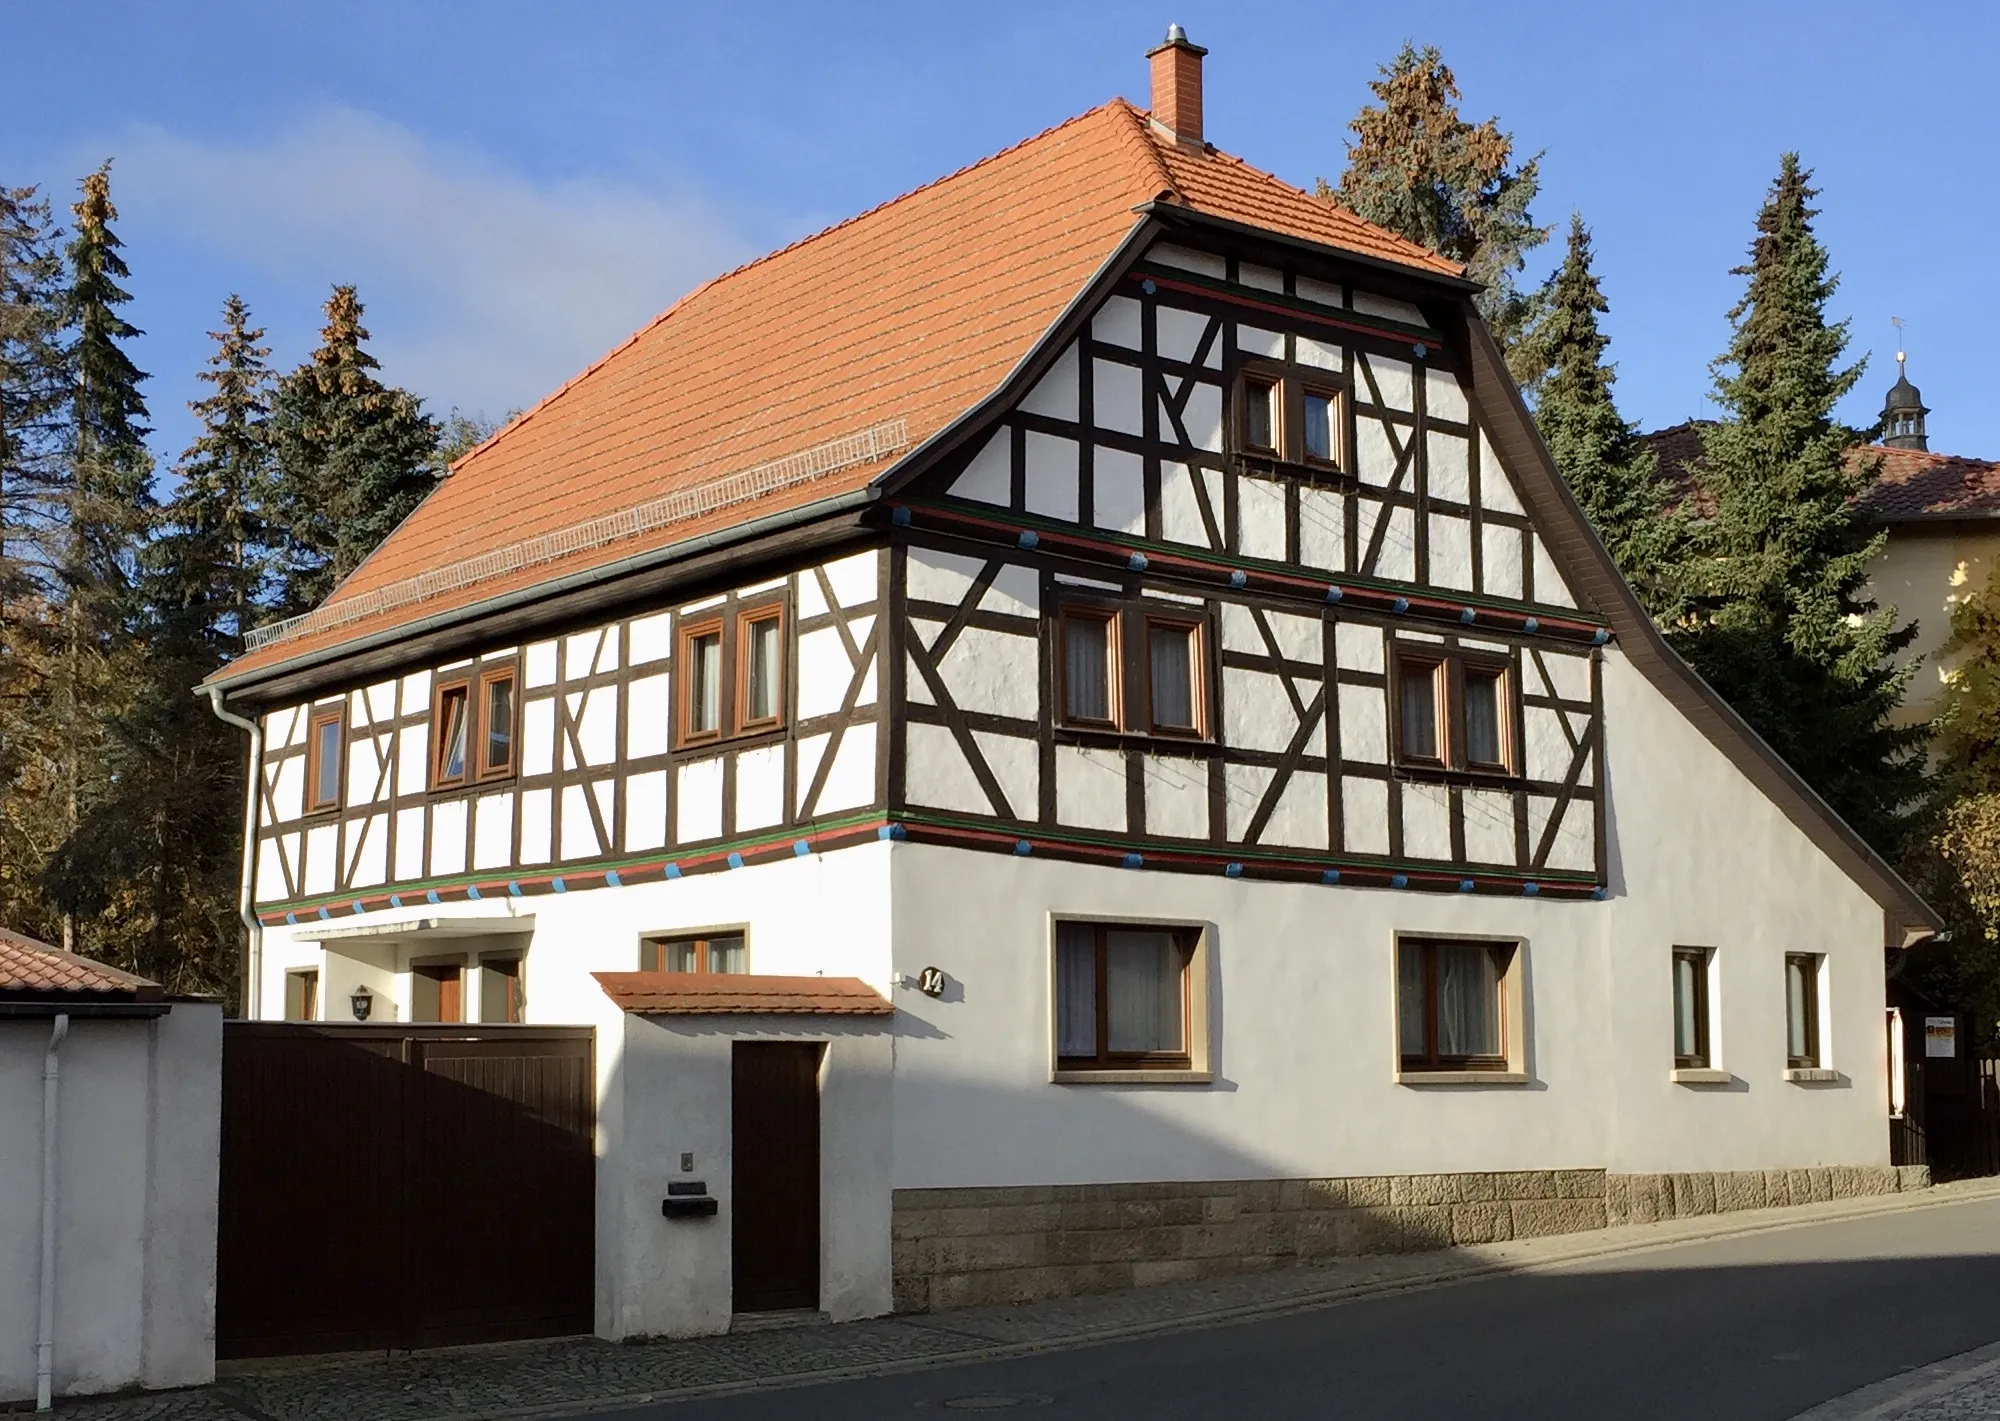 Photo showing: Former public bathhouse from 1732. It is located in Oberdorla, Thuringia (Germany).